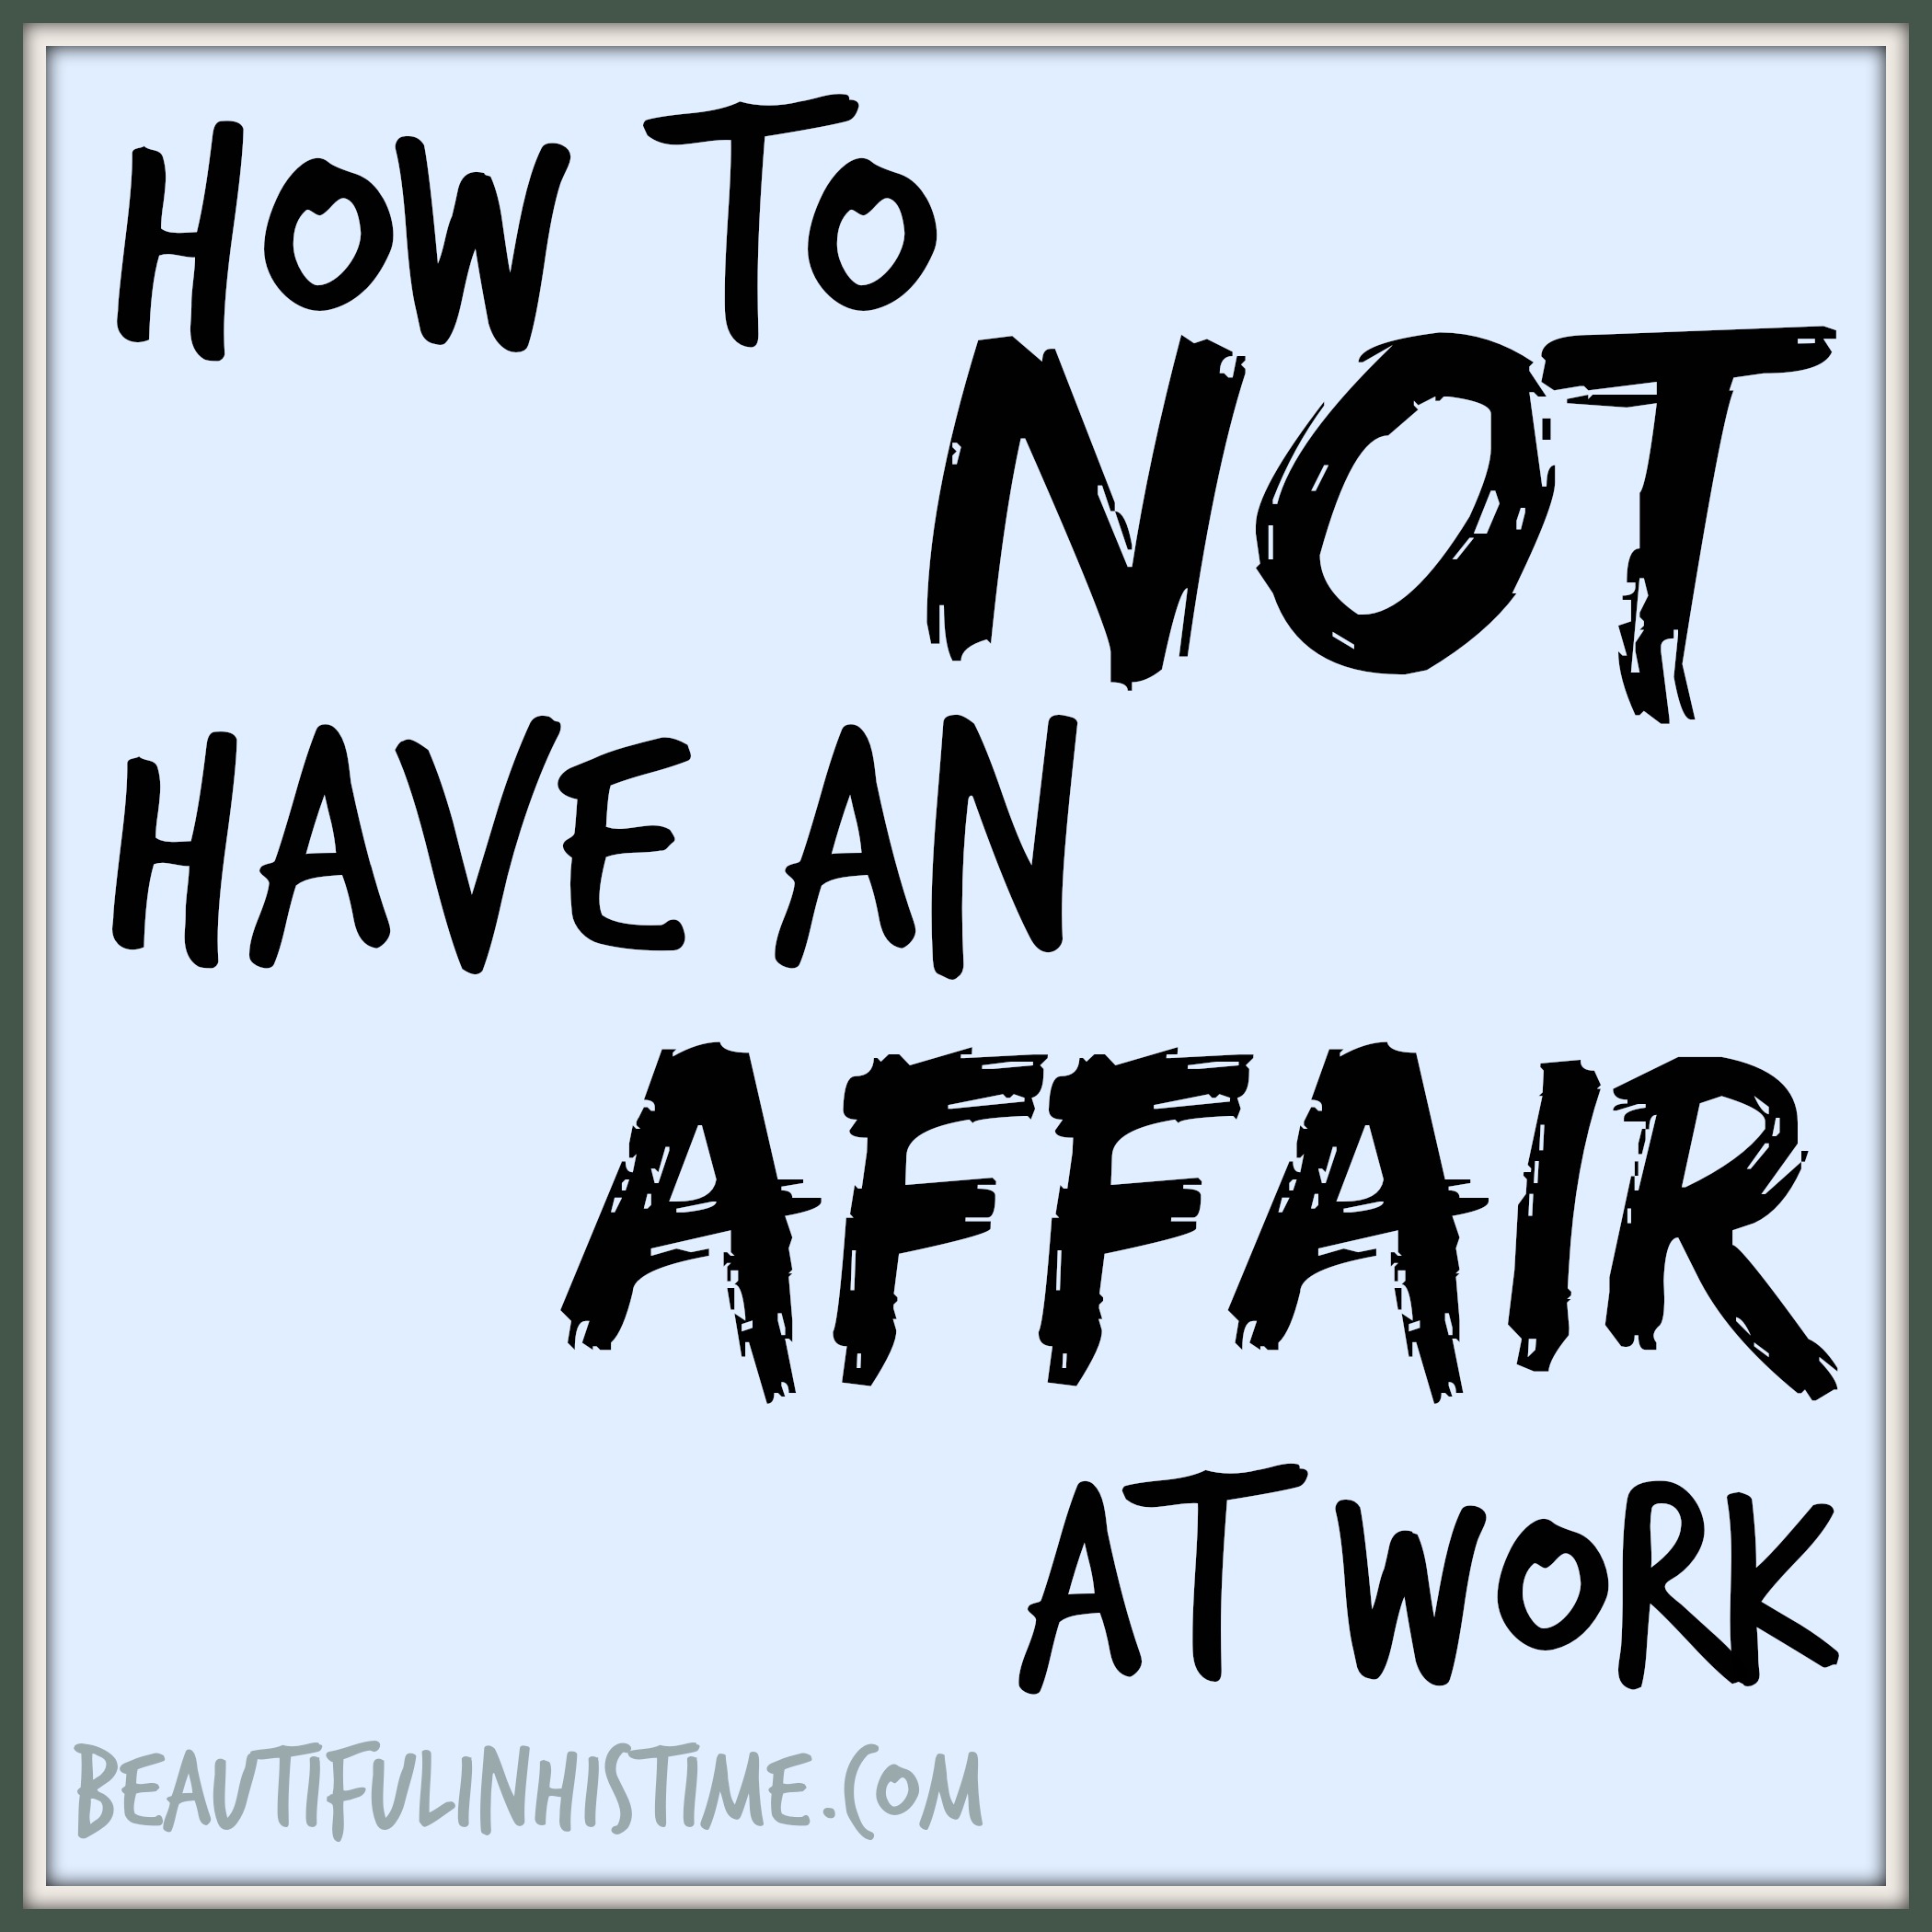 How to not have an affair at work (some advice for women in the workplace from a married man's perspective) | beautifulinhistime.com